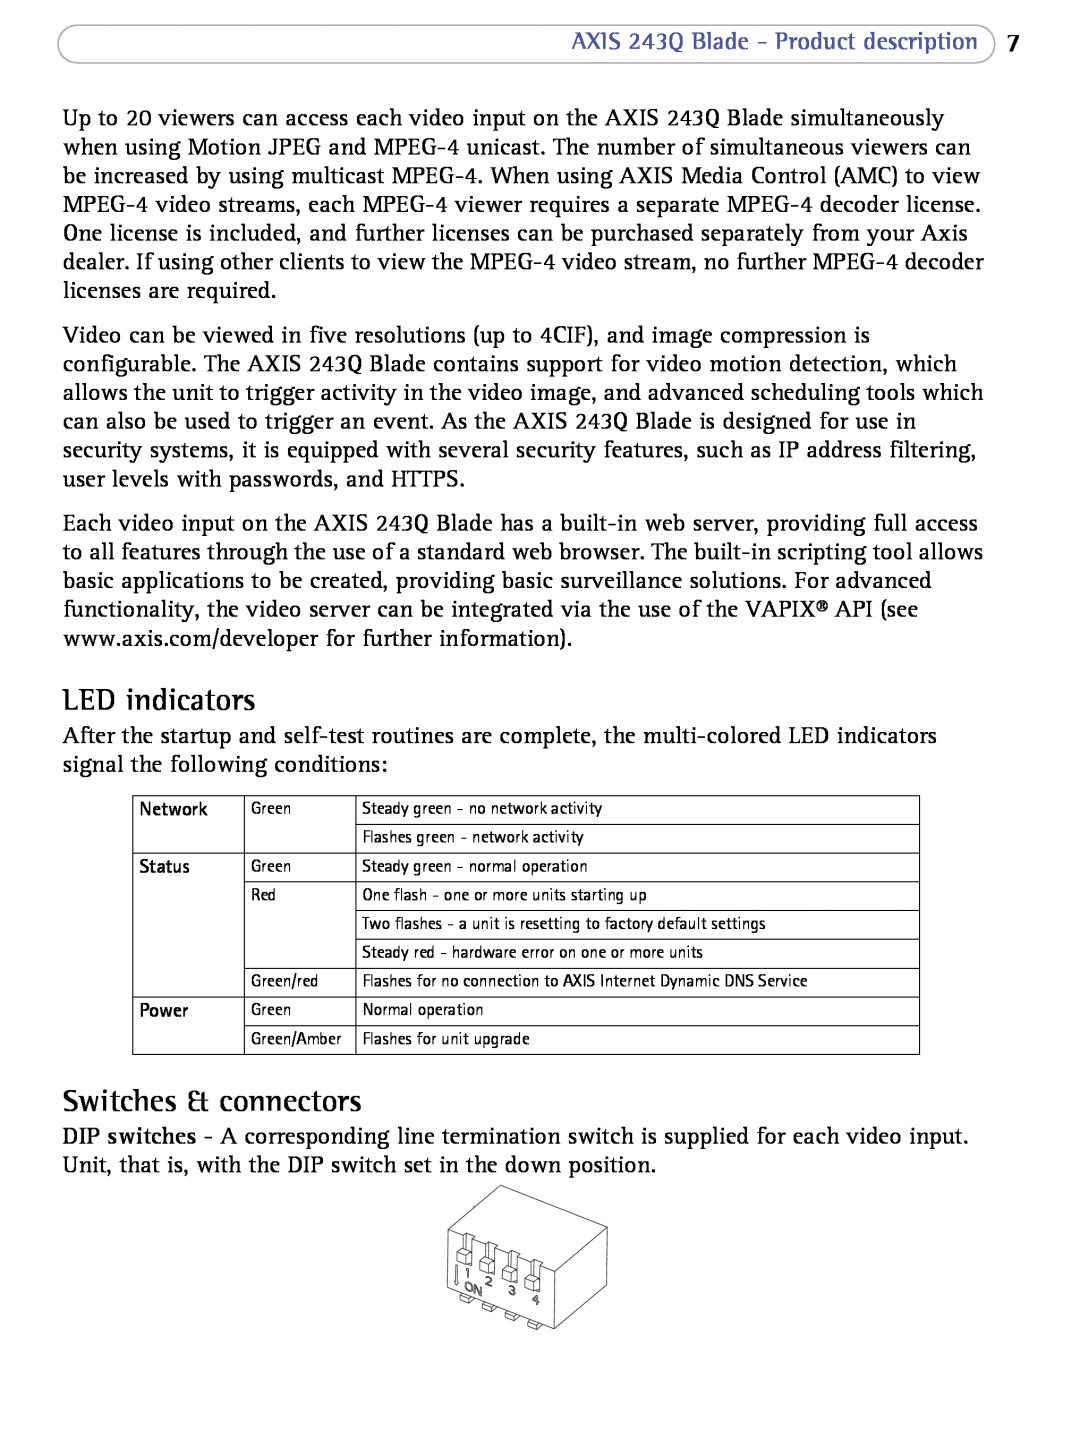 Axis Communications LED indicators, Switches & connectors, AXIS 243Q Blade - Product description, Network, Status 